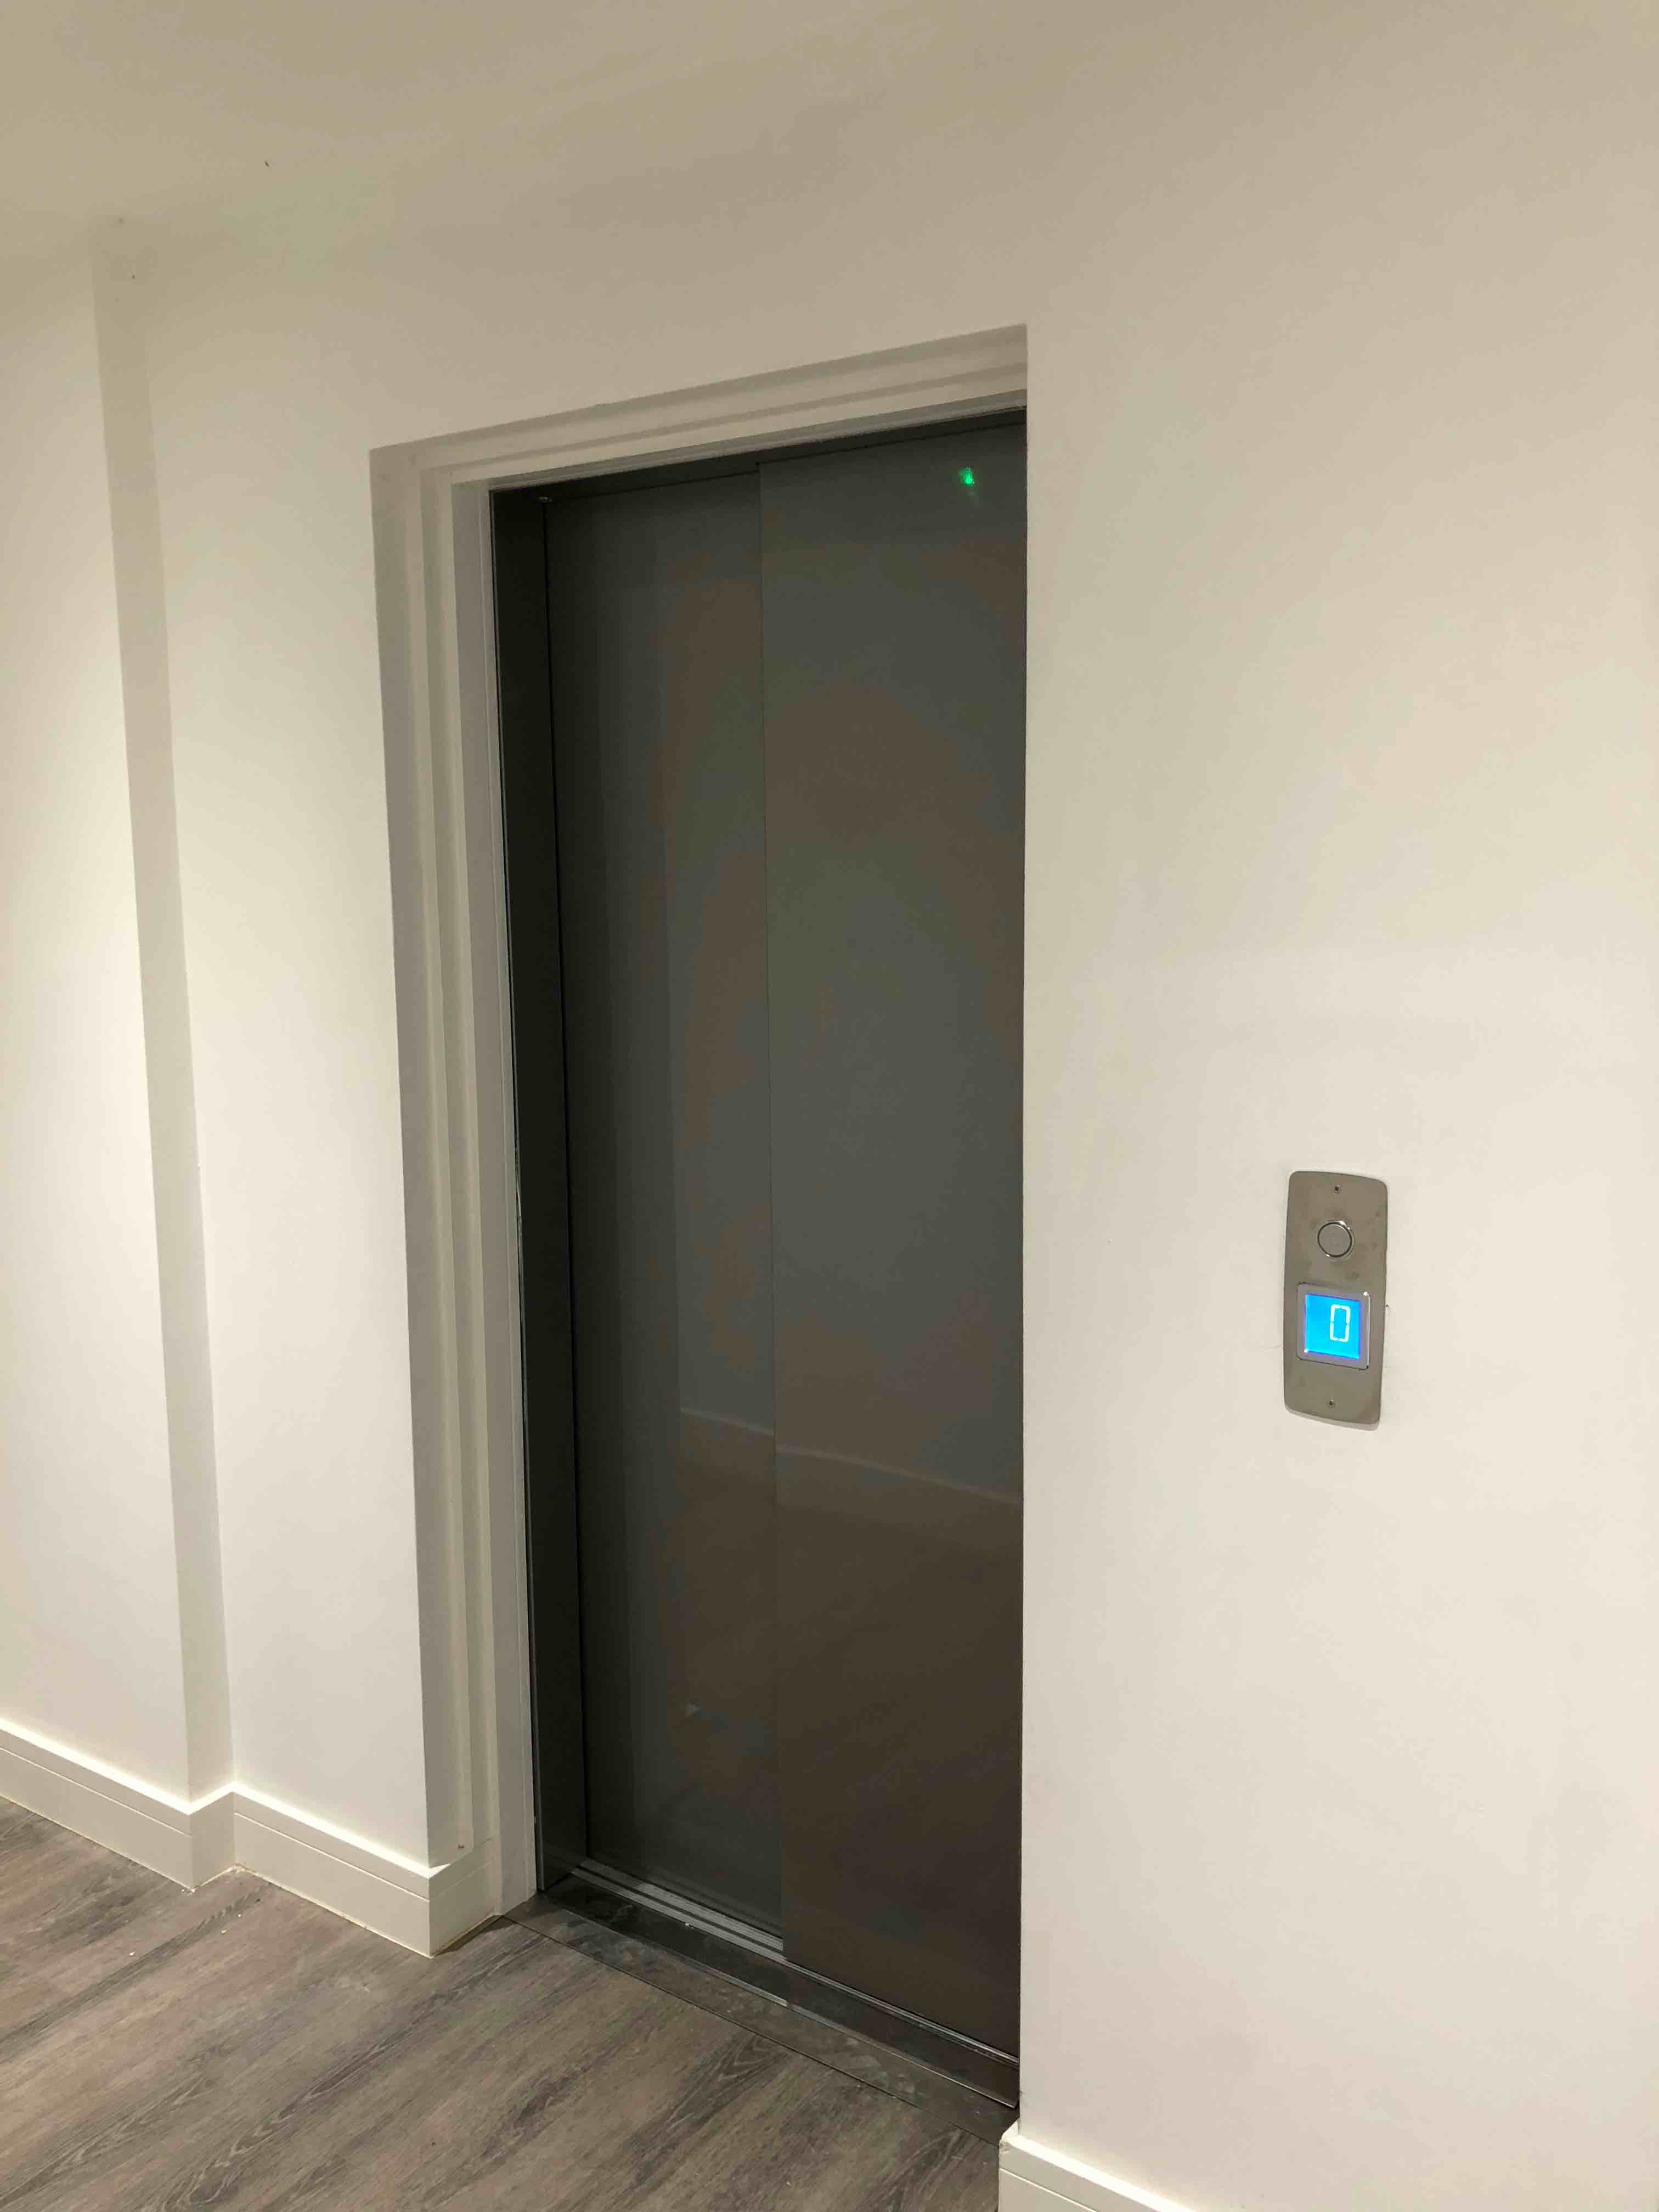 Lift in a Residential Building